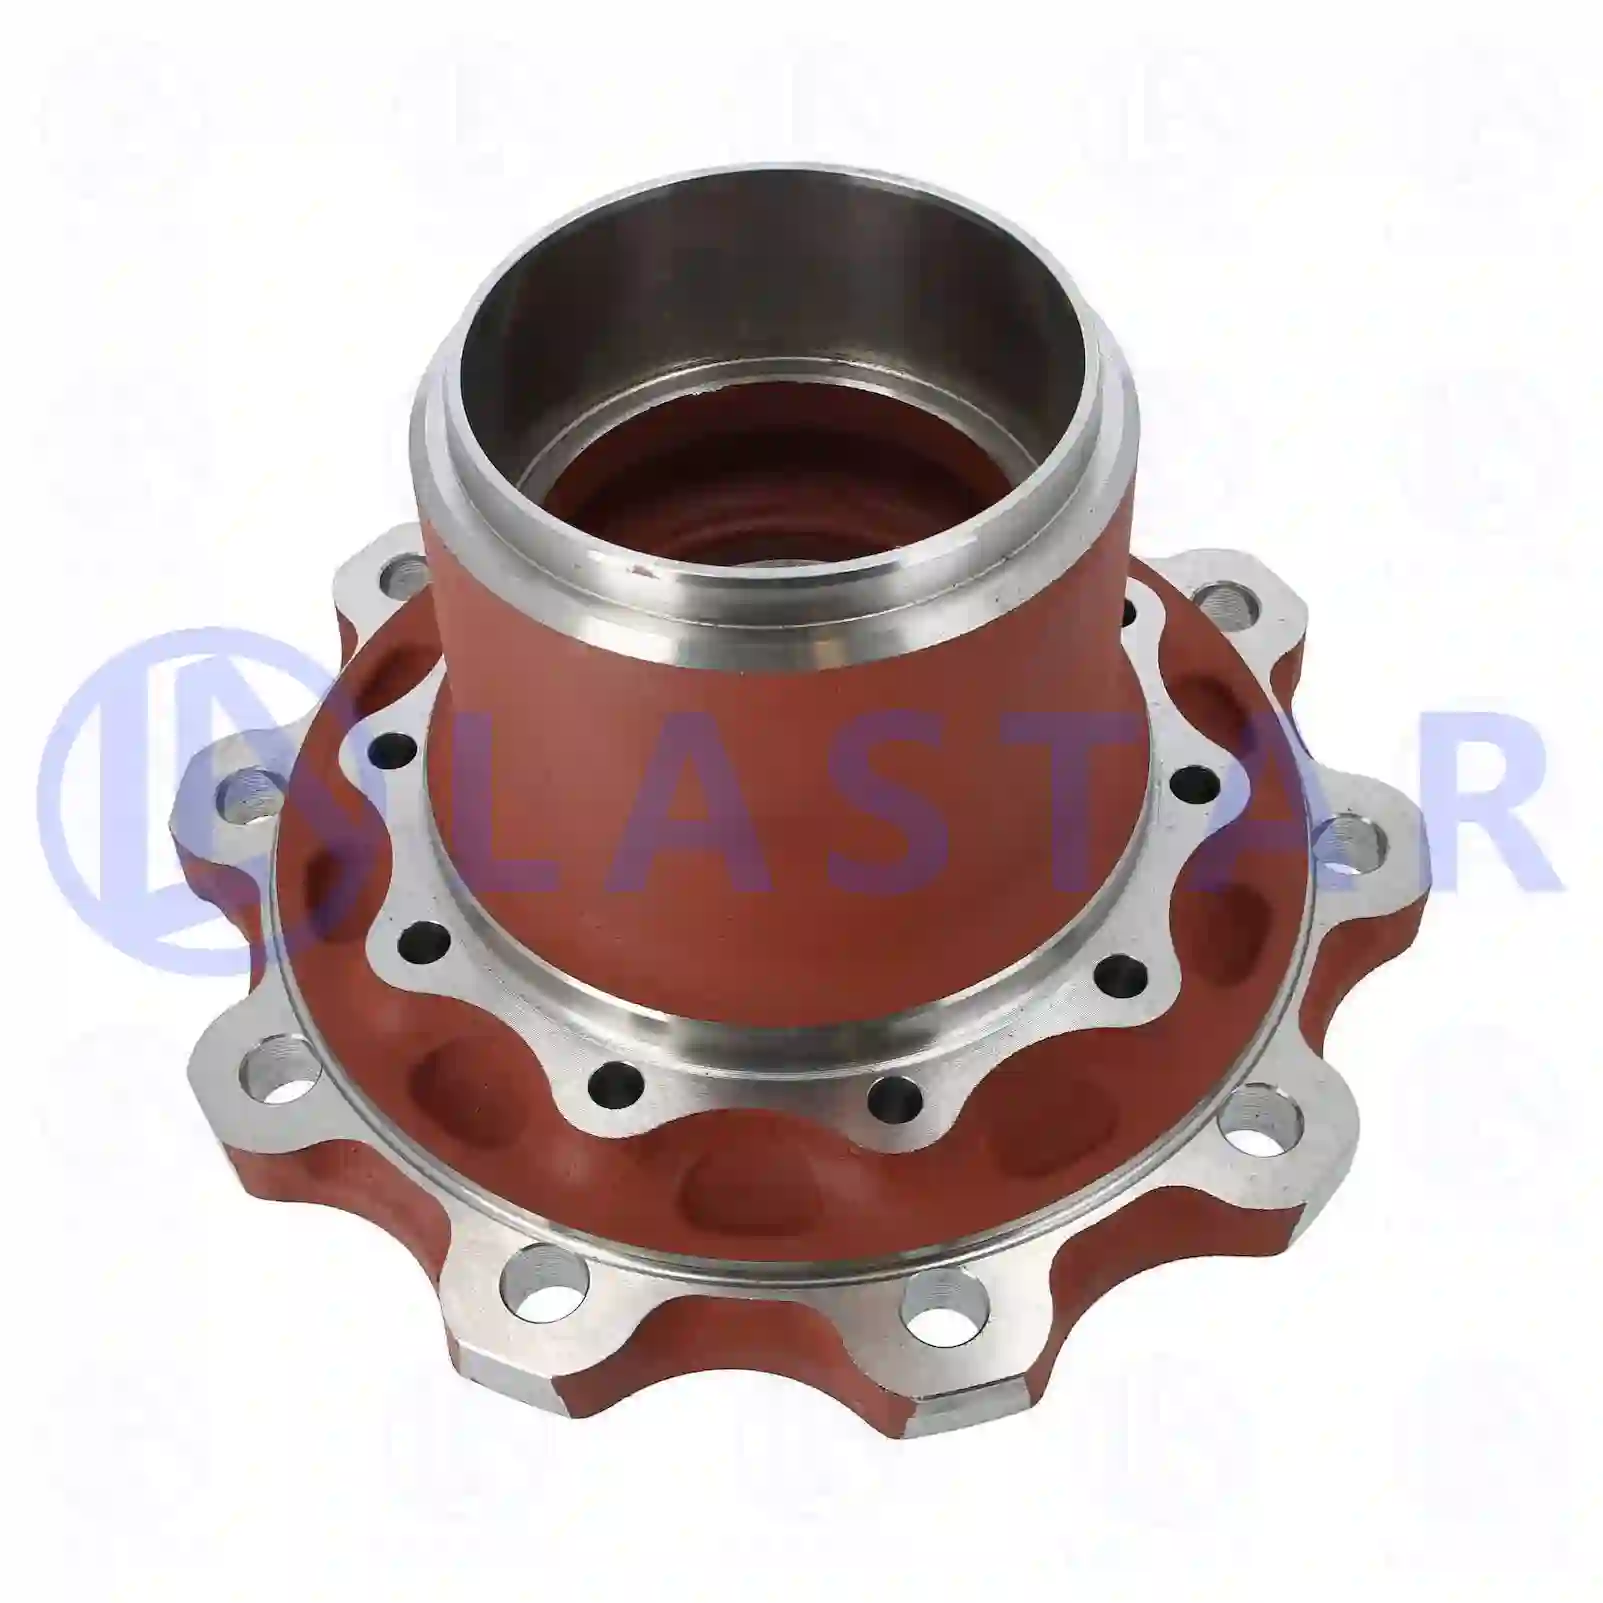 Wheel hub, without bearings, 77726403, 9493340801 ||  77726403 Lastar Spare Part | Truck Spare Parts, Auotomotive Spare Parts Wheel hub, without bearings, 77726403, 9493340801 ||  77726403 Lastar Spare Part | Truck Spare Parts, Auotomotive Spare Parts